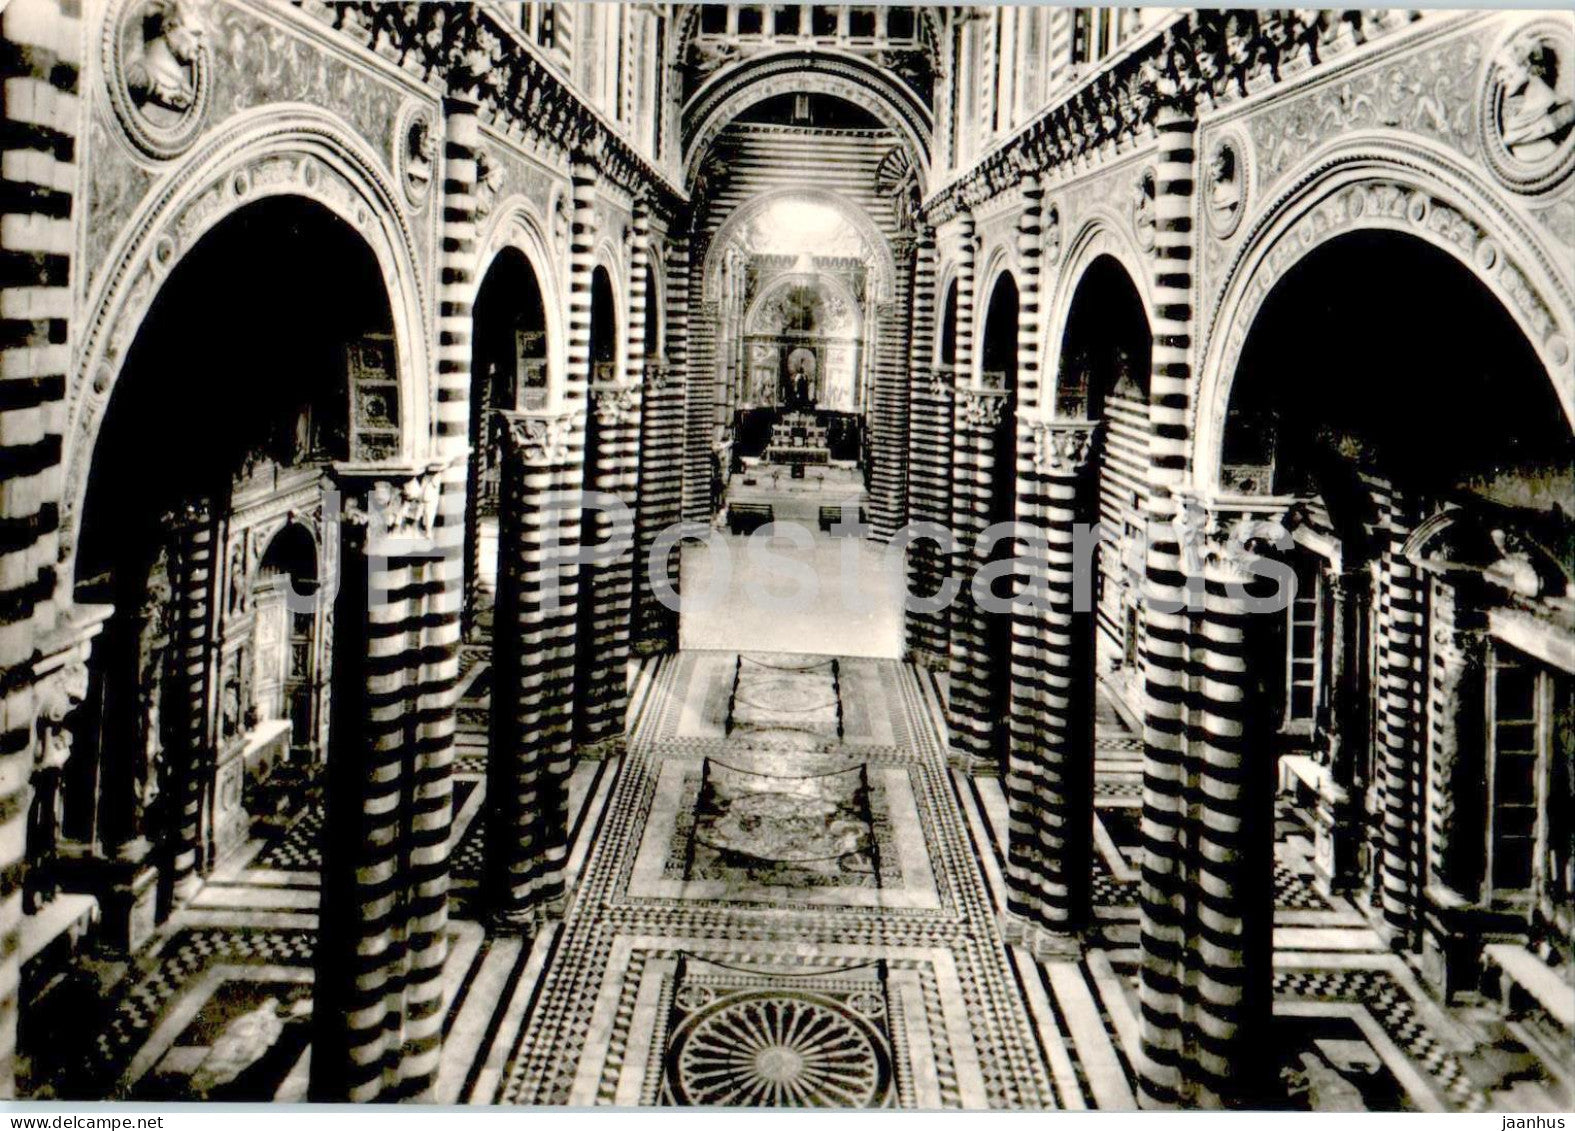 Siena - Interno della Cattedrale - inside of the cathedral - 9160 - Italy - unused - JH Postcards